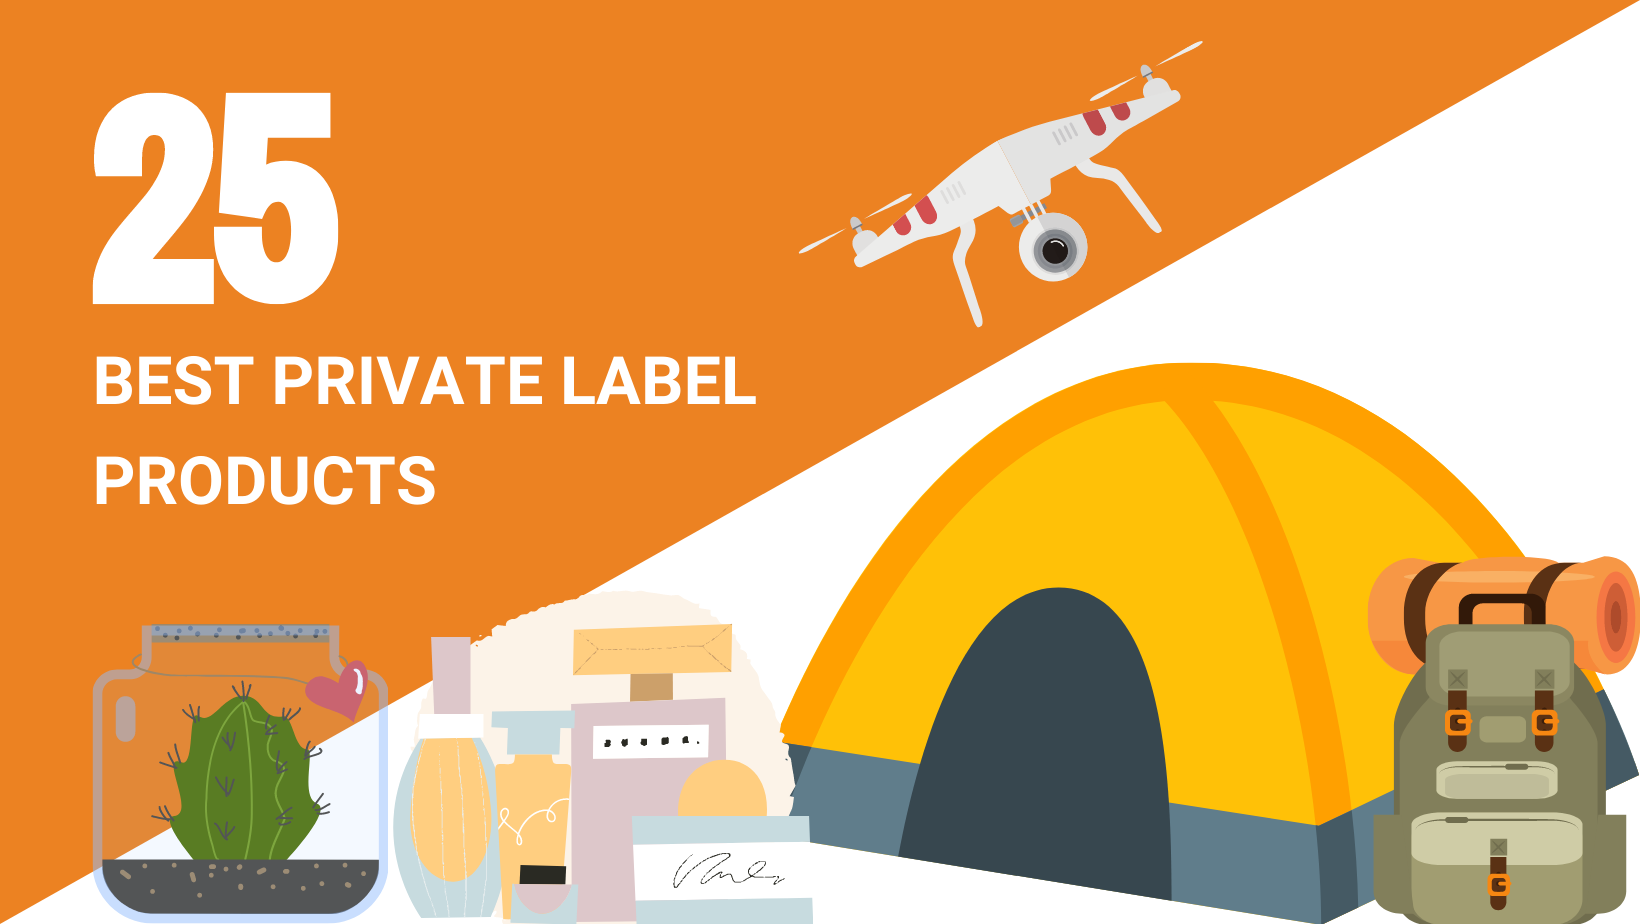 25 BEST PRIVATE LABEL PRODUCTS